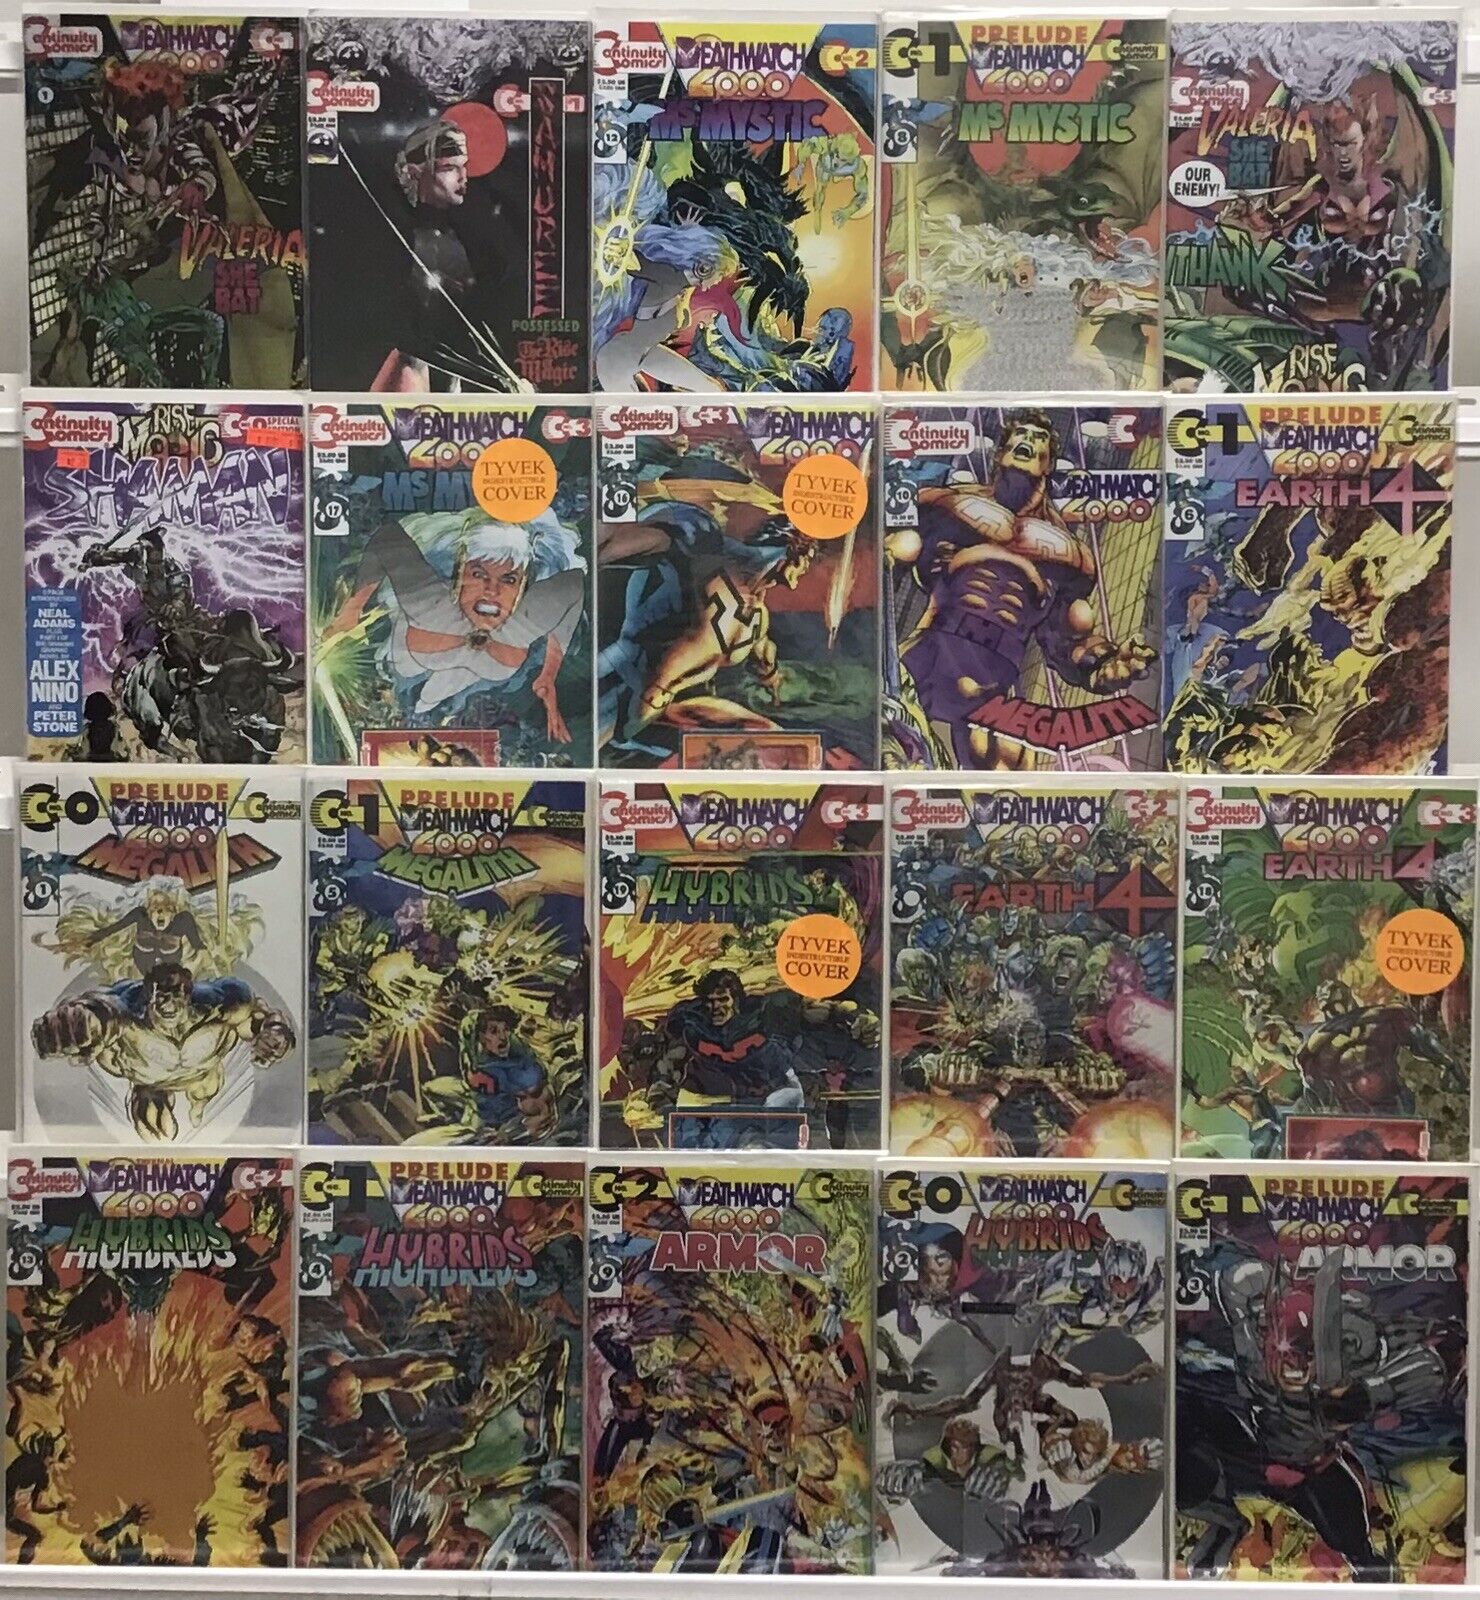 Continuity Comics - Deathwatch 2000 - Earth 4, Hybrids, Megalith - Lot Of 20